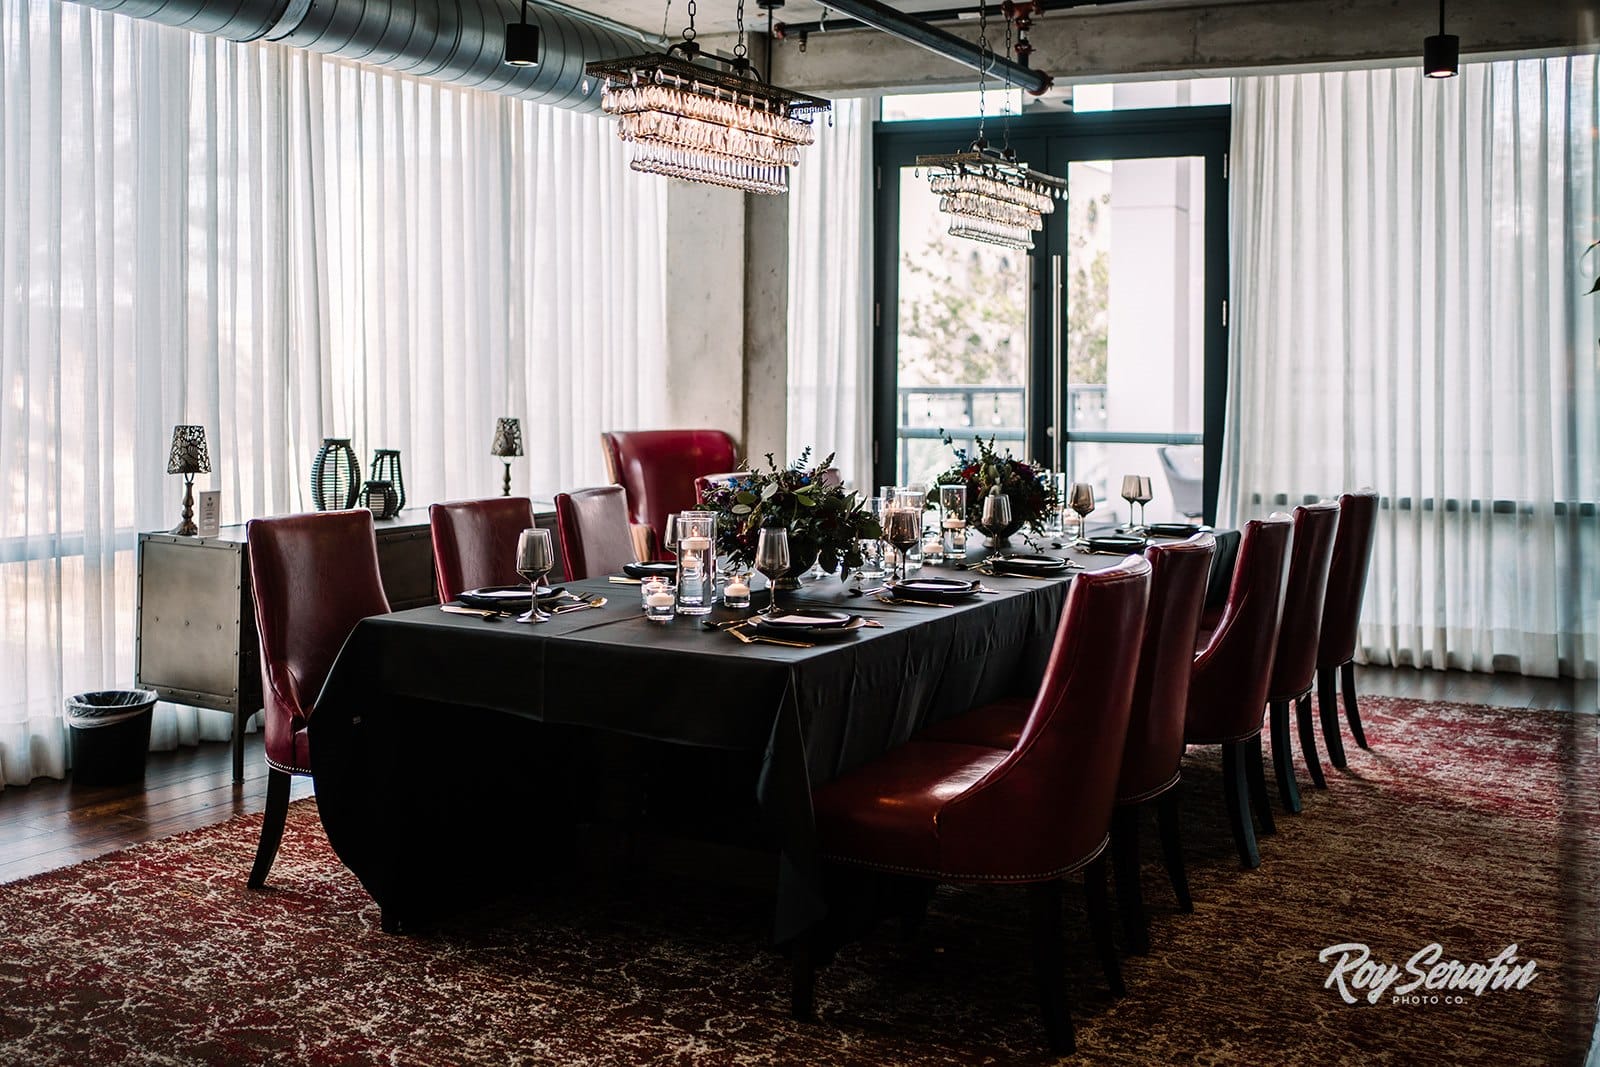 private dining table in room with bright red chairs and black linen set for nice dining with floral and candles in the middle of the table as well